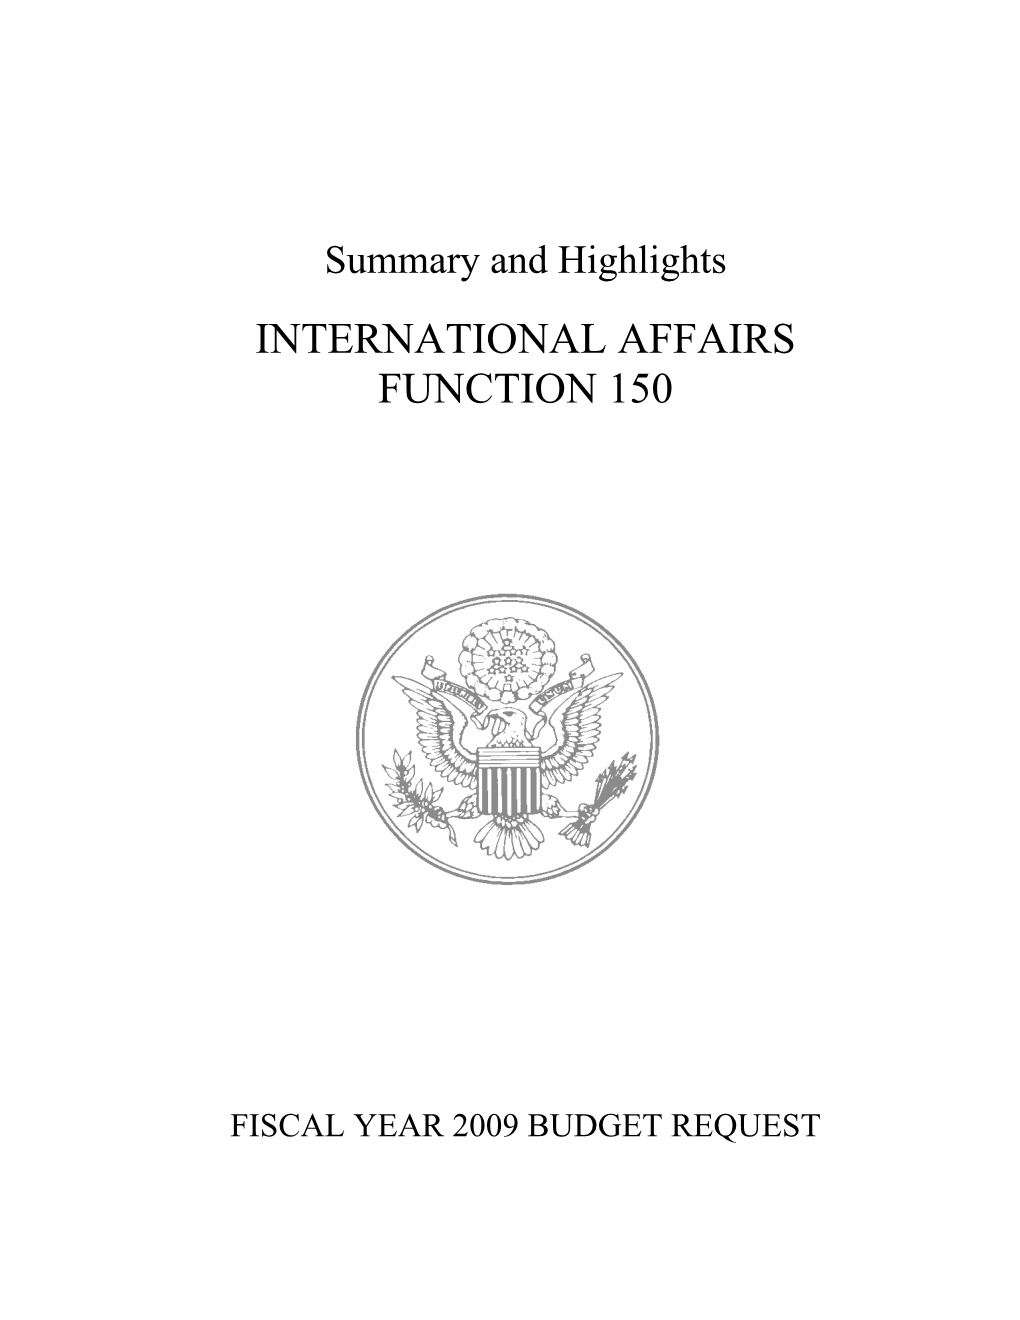 One-Piece PDF of FY 2009 Summary and Highlights